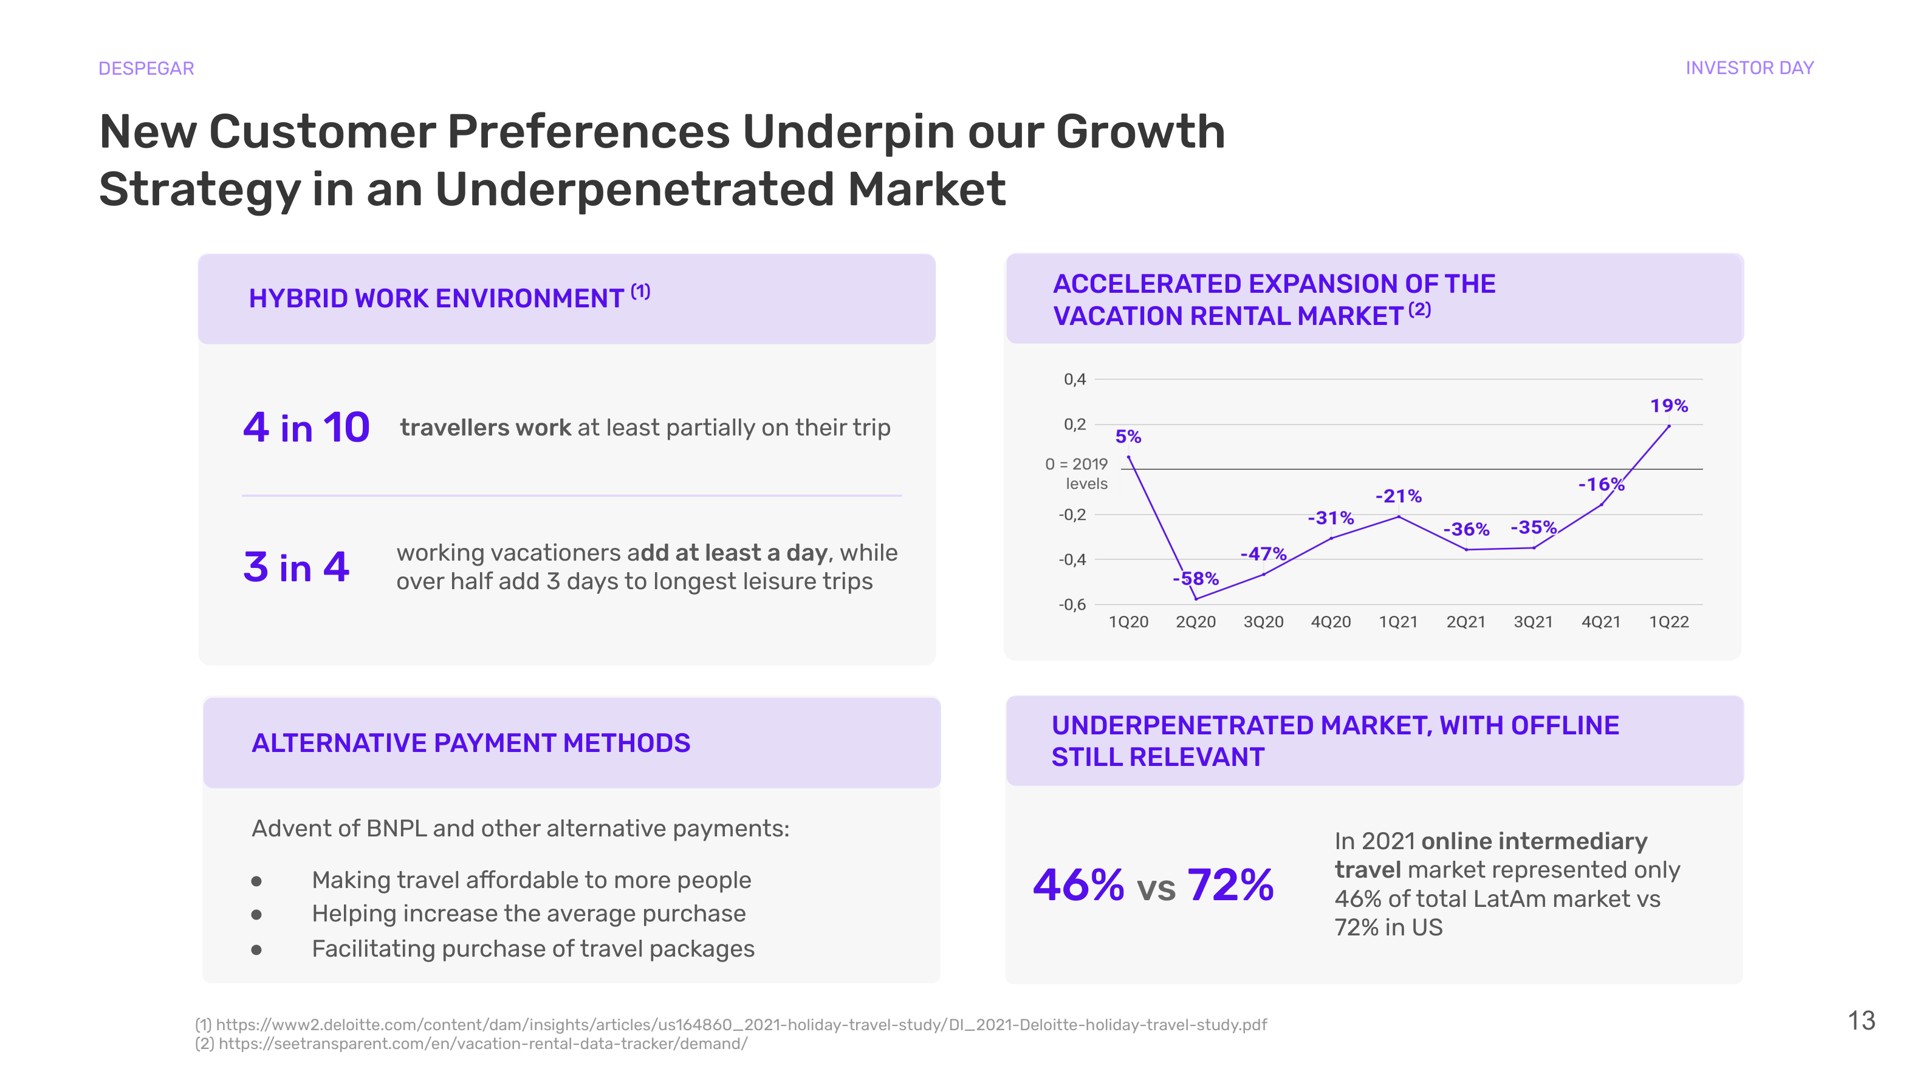 new customer preferences underpin our growth strategy in an market hybrid work environment accelerated expansion of the vacation rental market in in fico alternative payment methods market with still relevant | Despegar